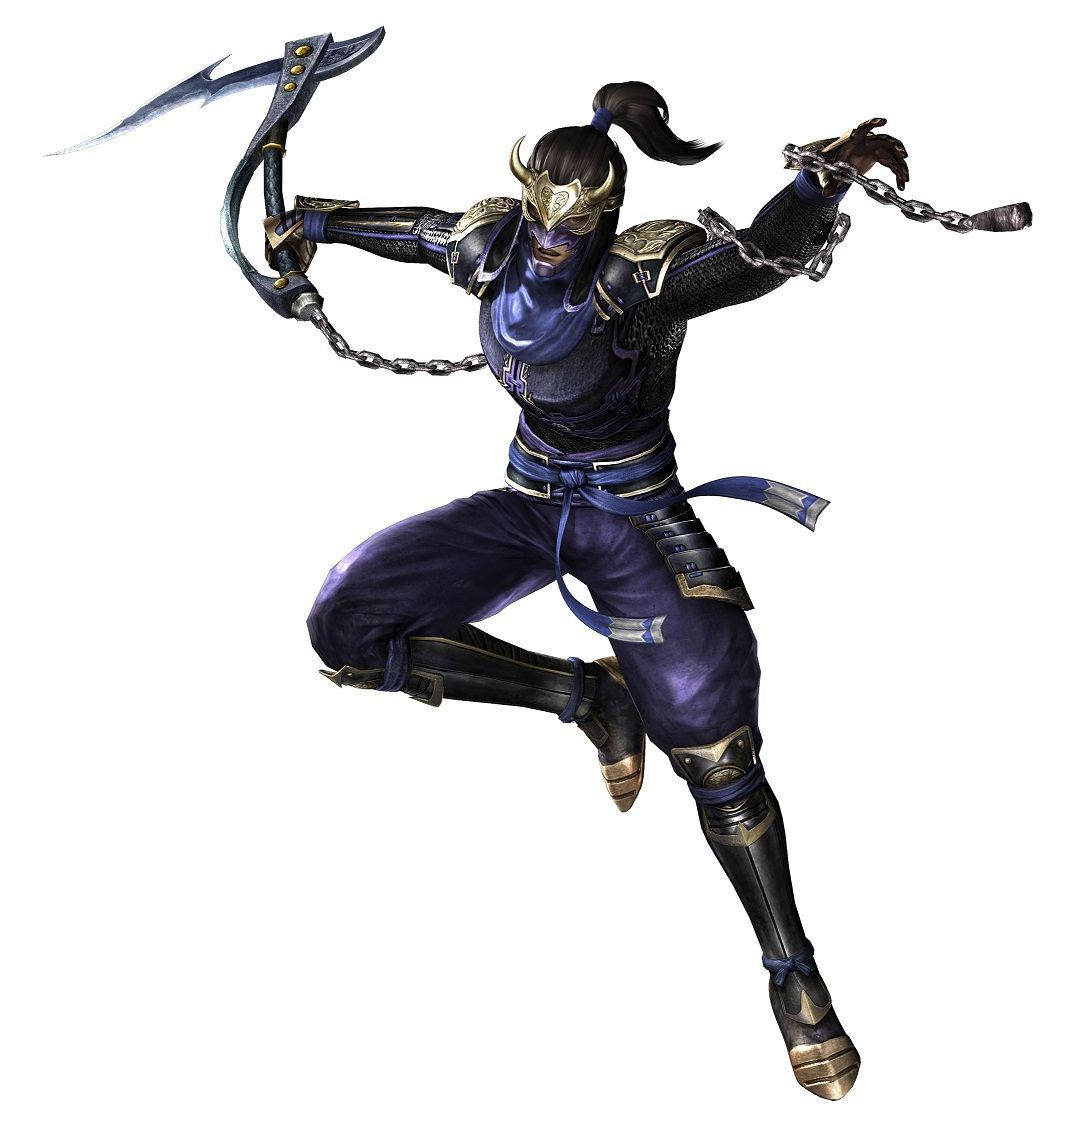 Image of the character in the Samurai Warriors series summary 51